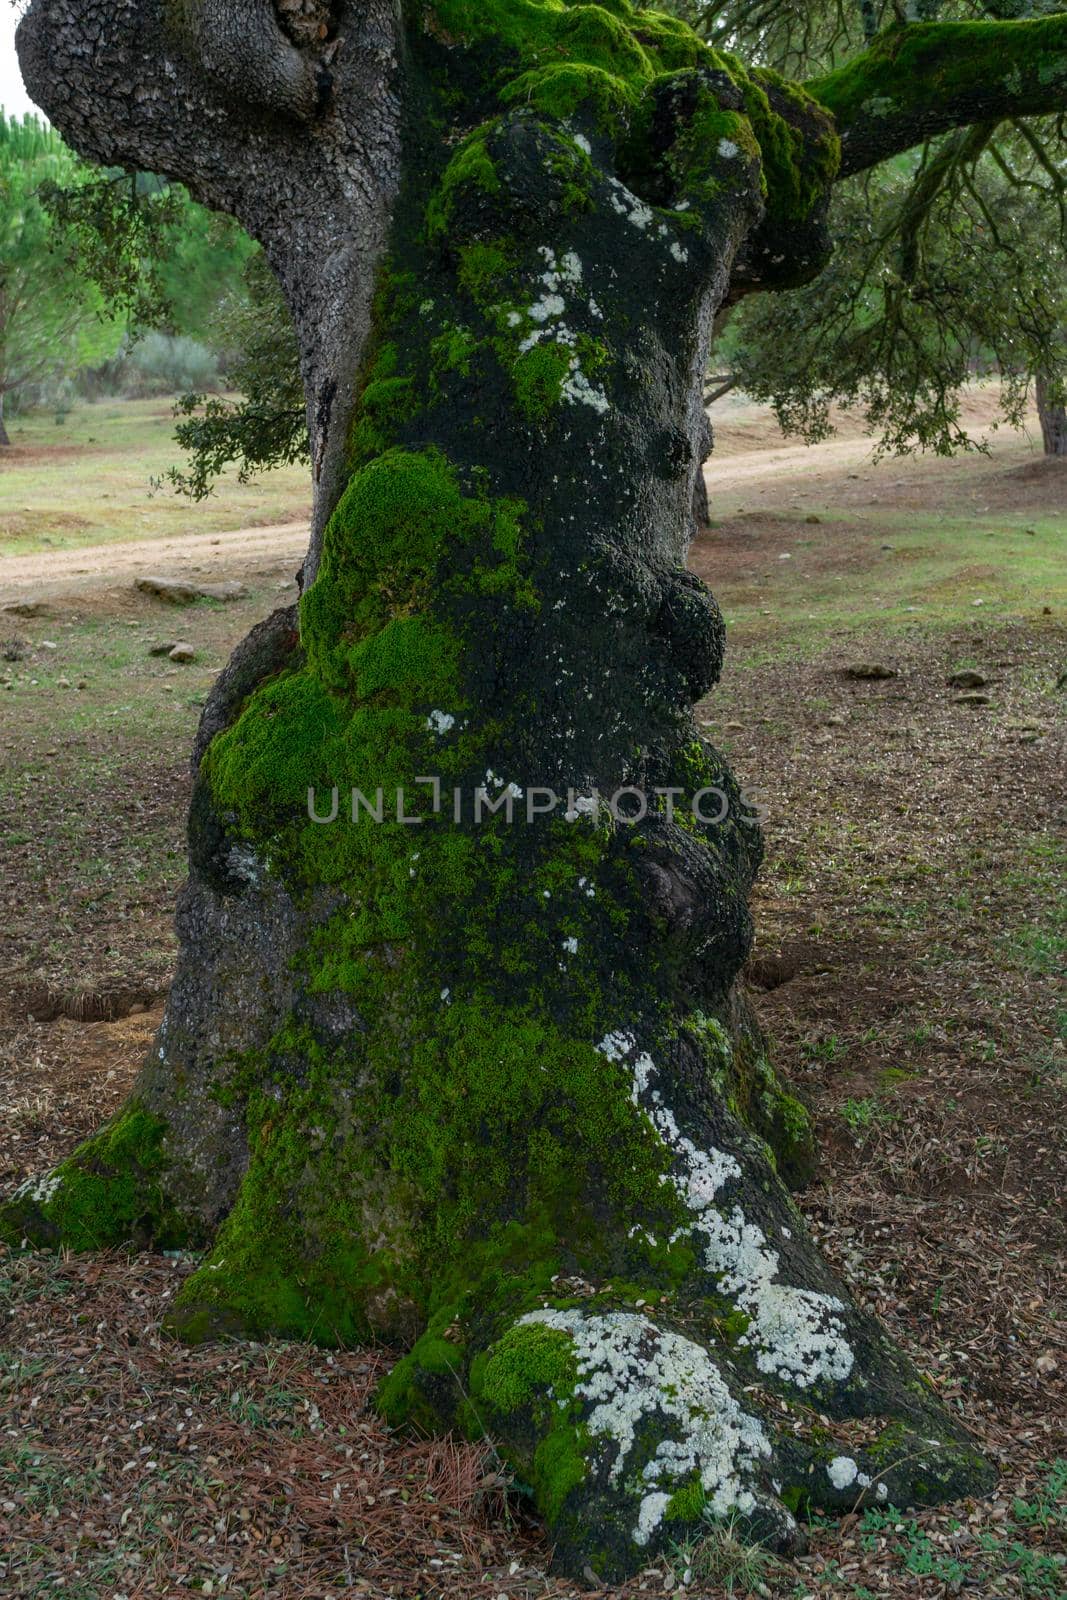 Holm oak or Quercus ilex in the foreground with moss on the trunk by joseantona